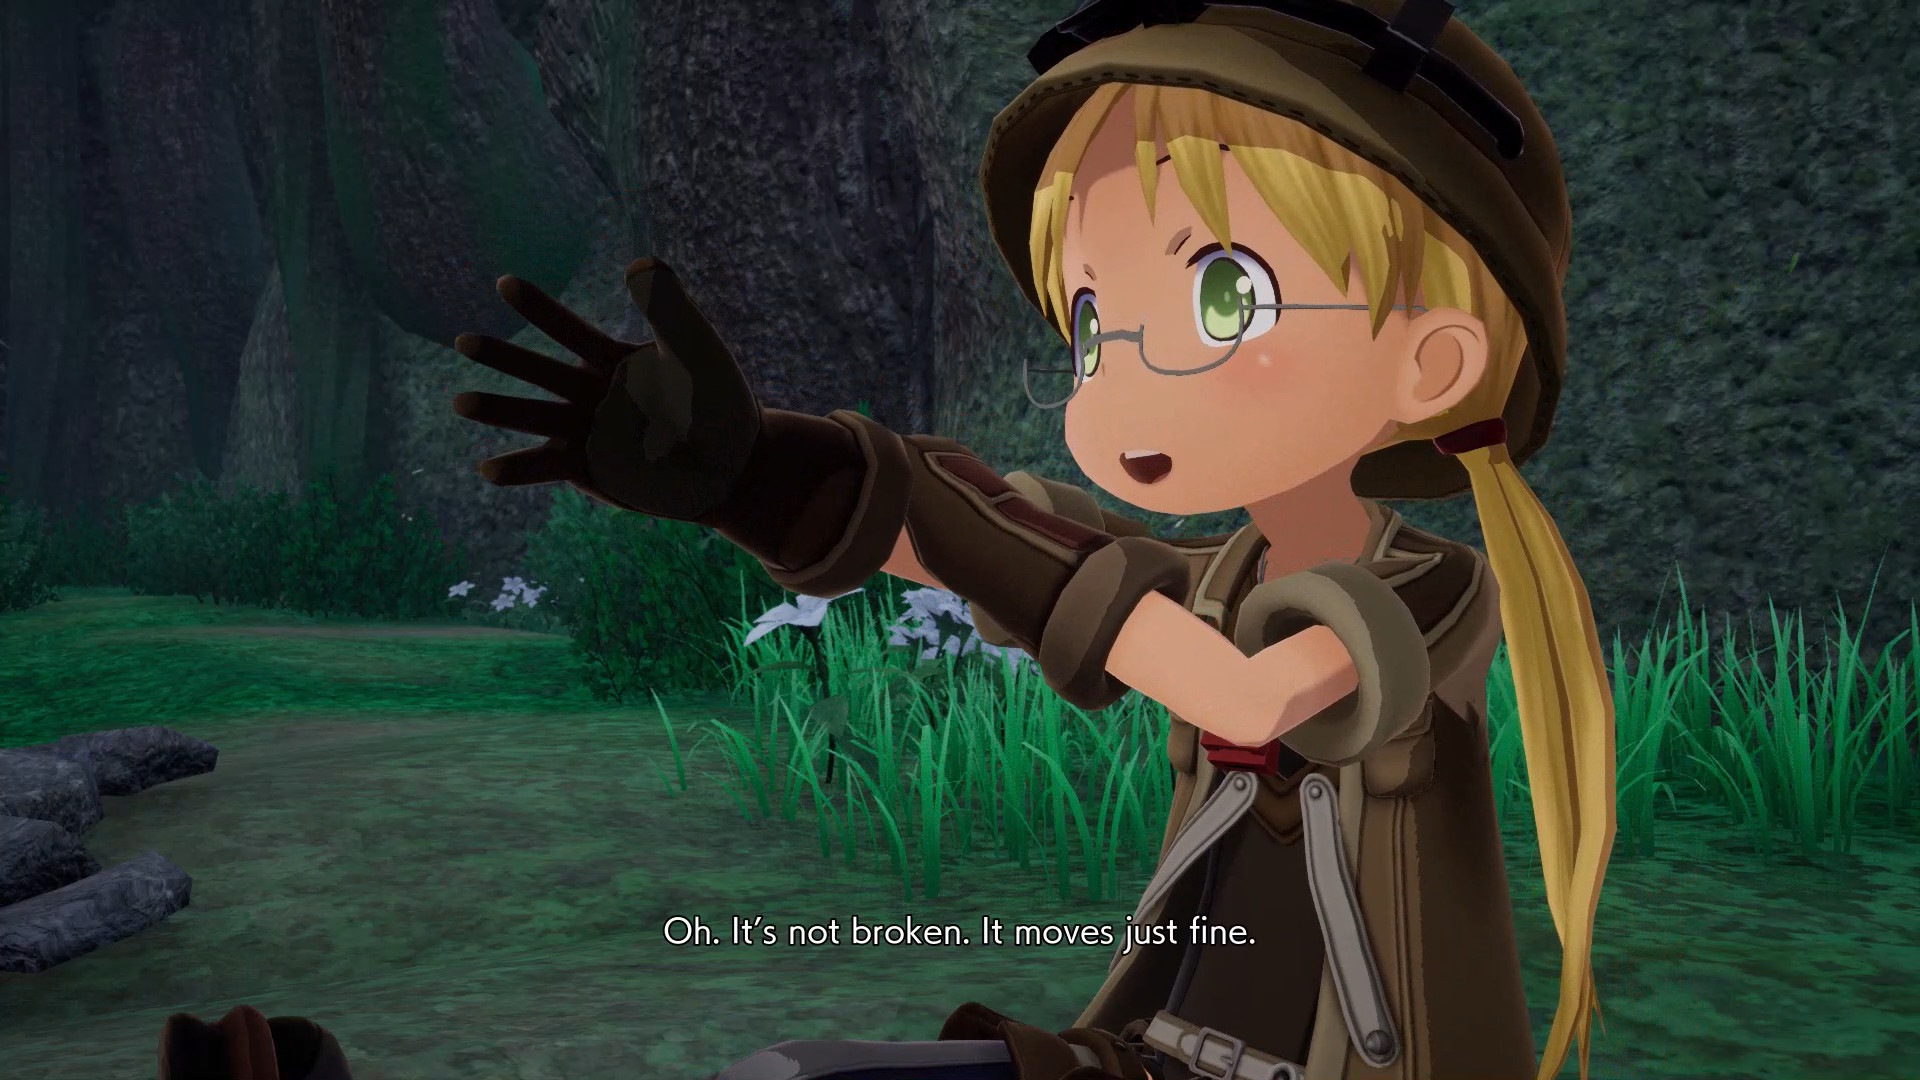 A review of Made in Abyss (S1)